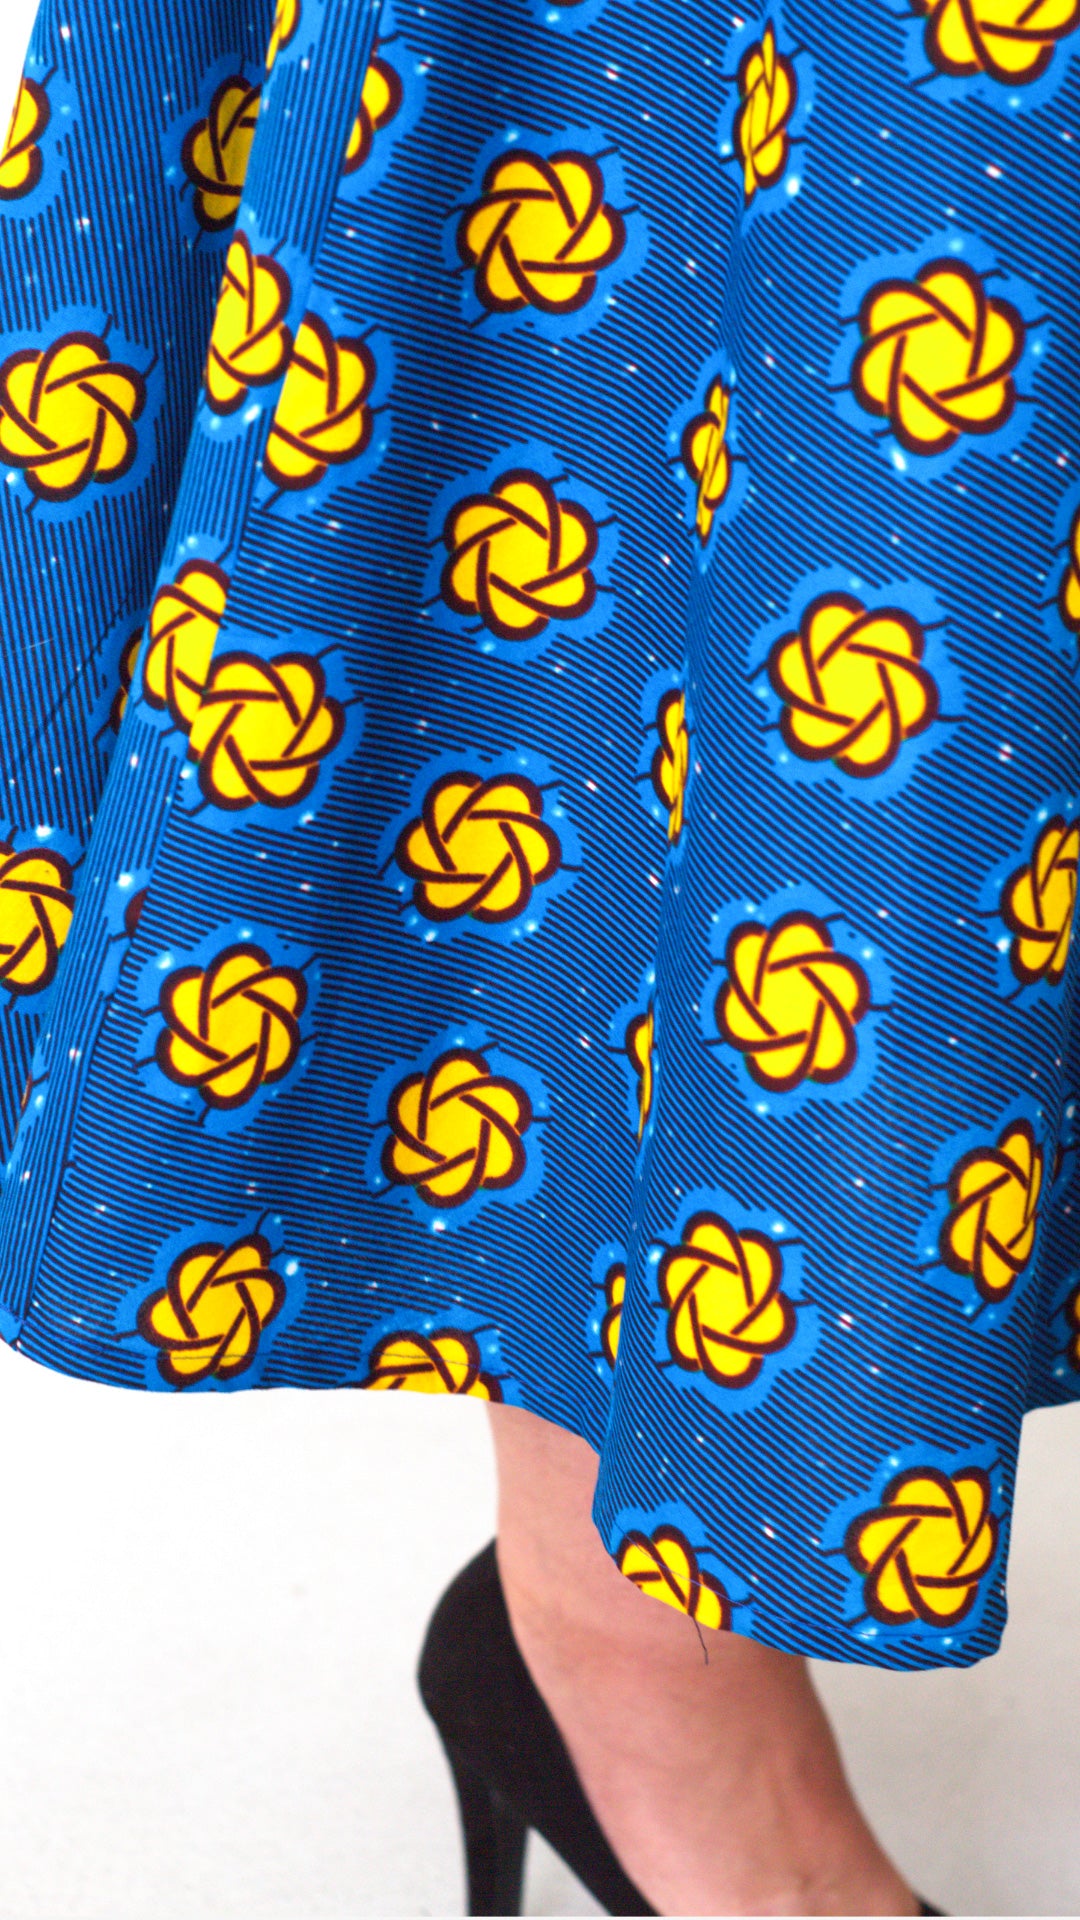 A close-up gracefully highlights the blue fabric and intricate yellow design details at the bottom of the dress.